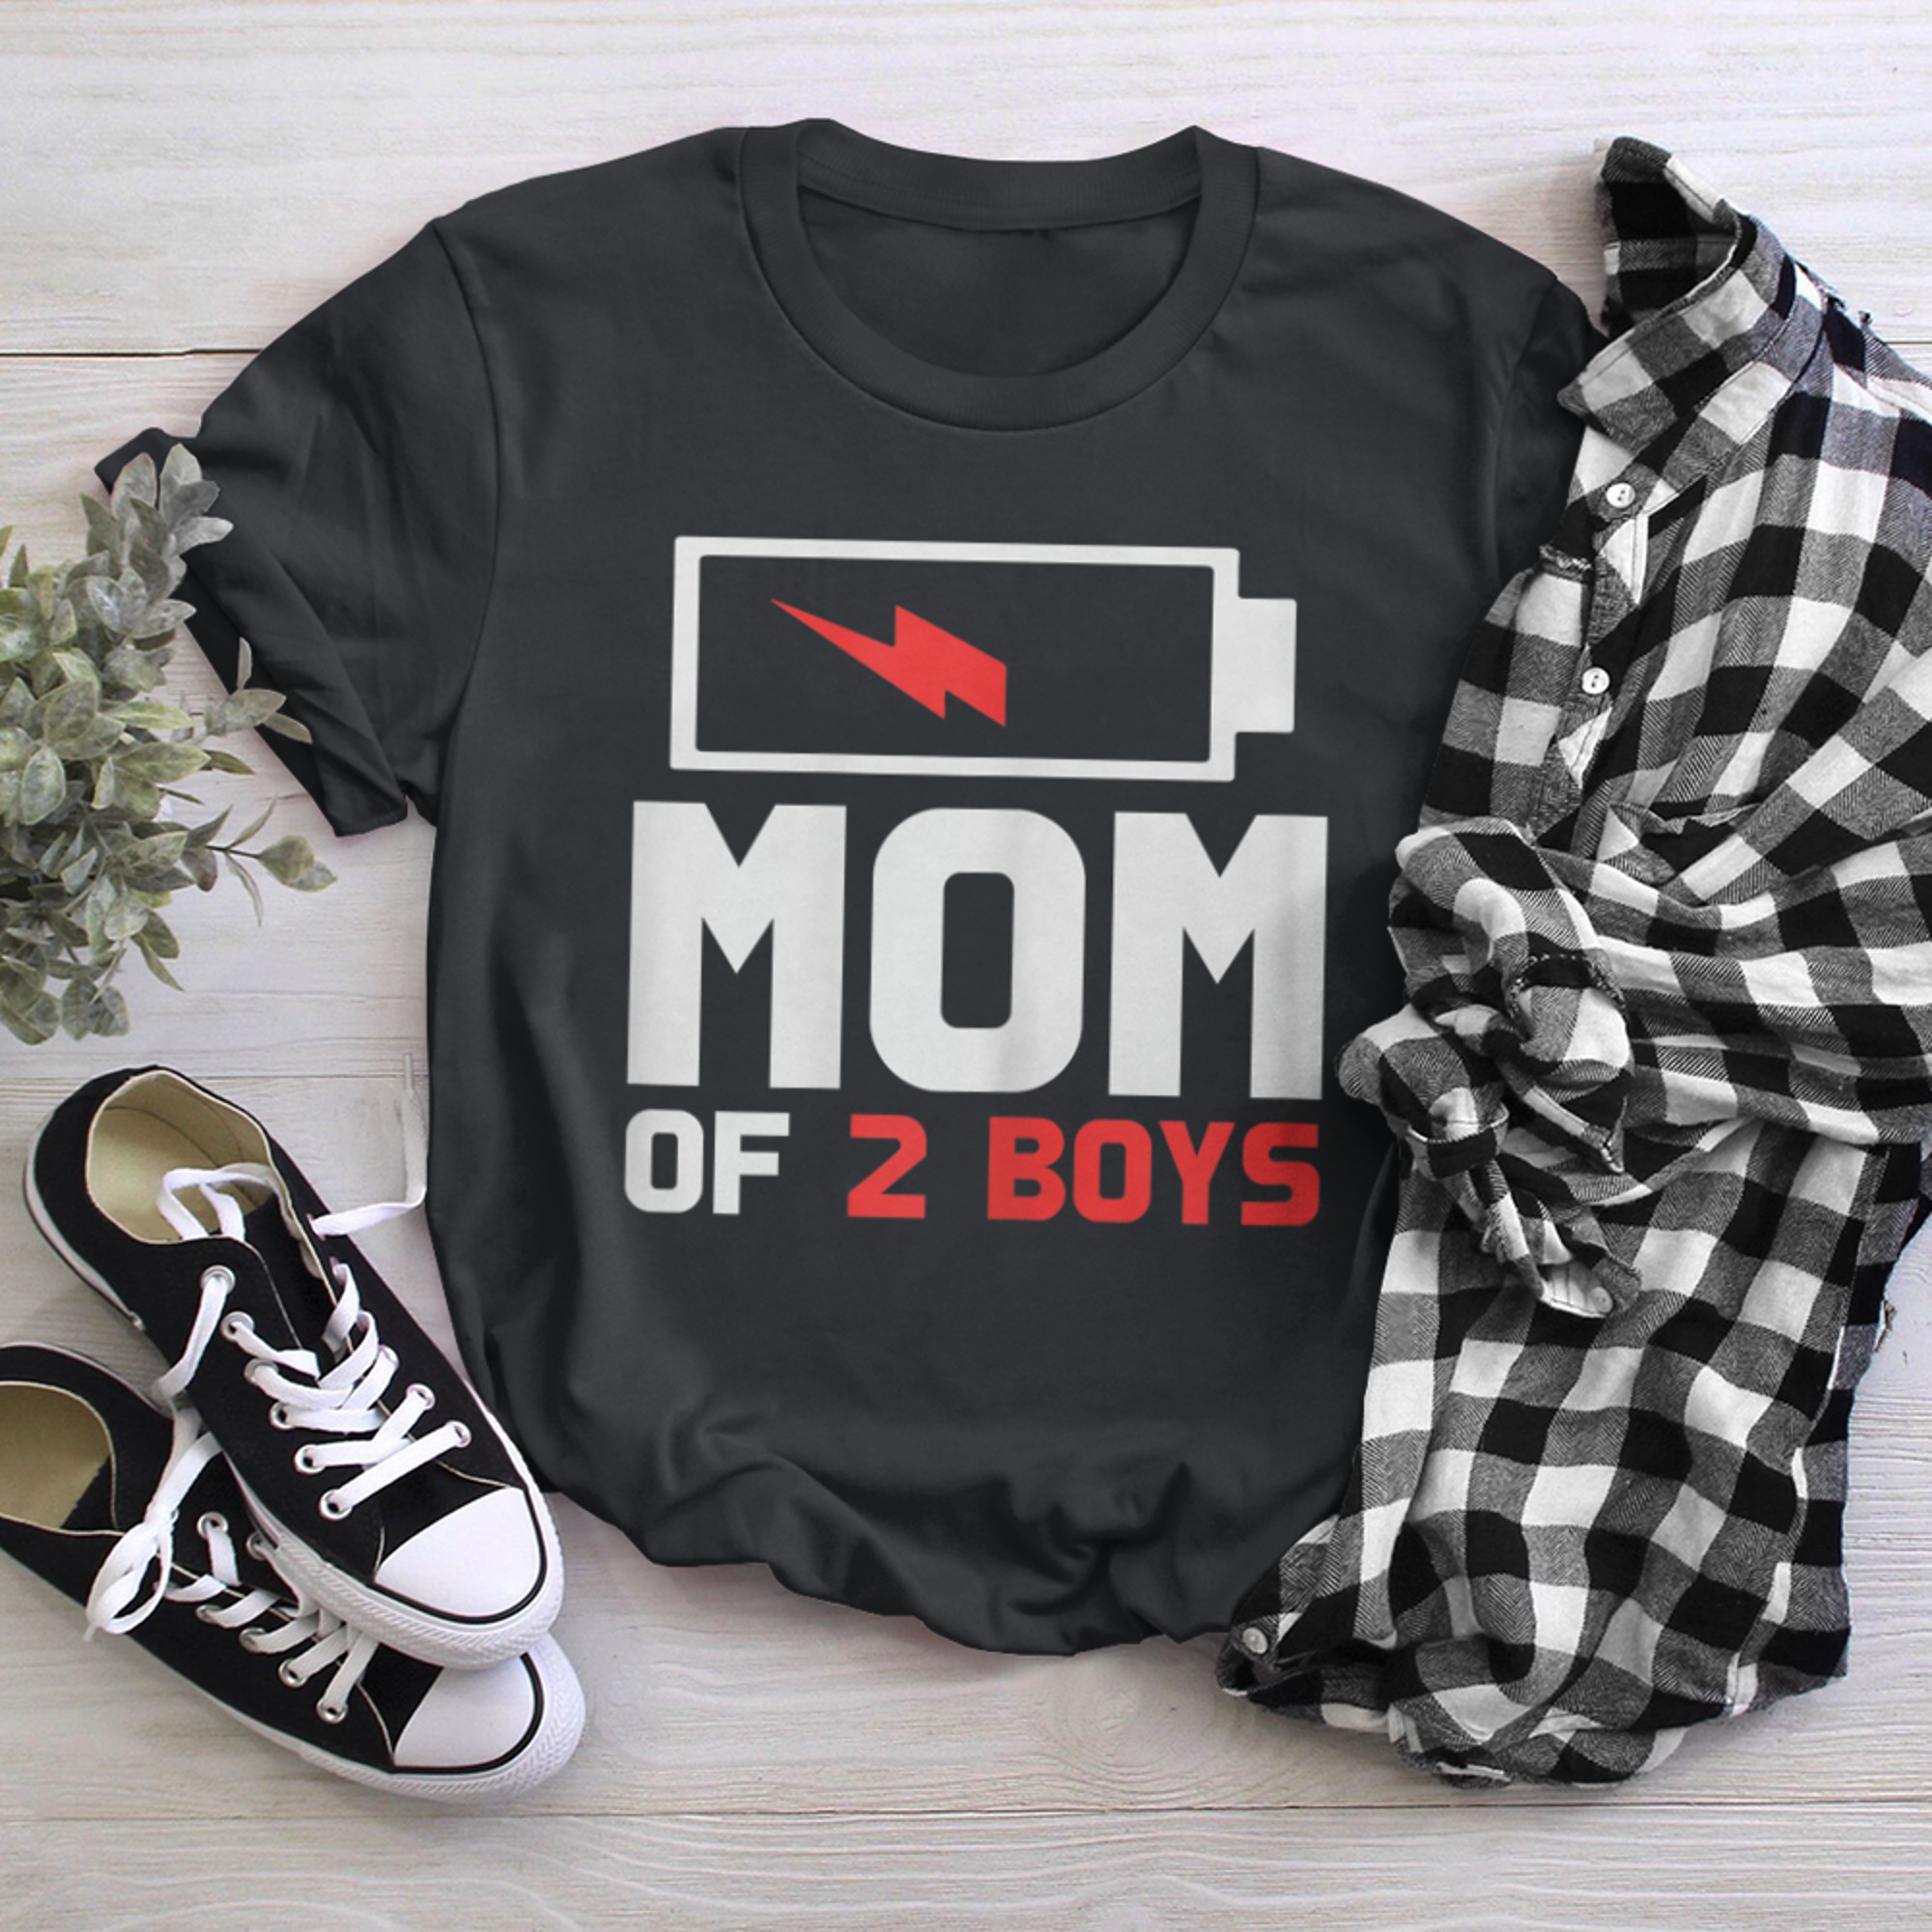 Mom of from Son Mothers Day Birthday (2) t-shirt black